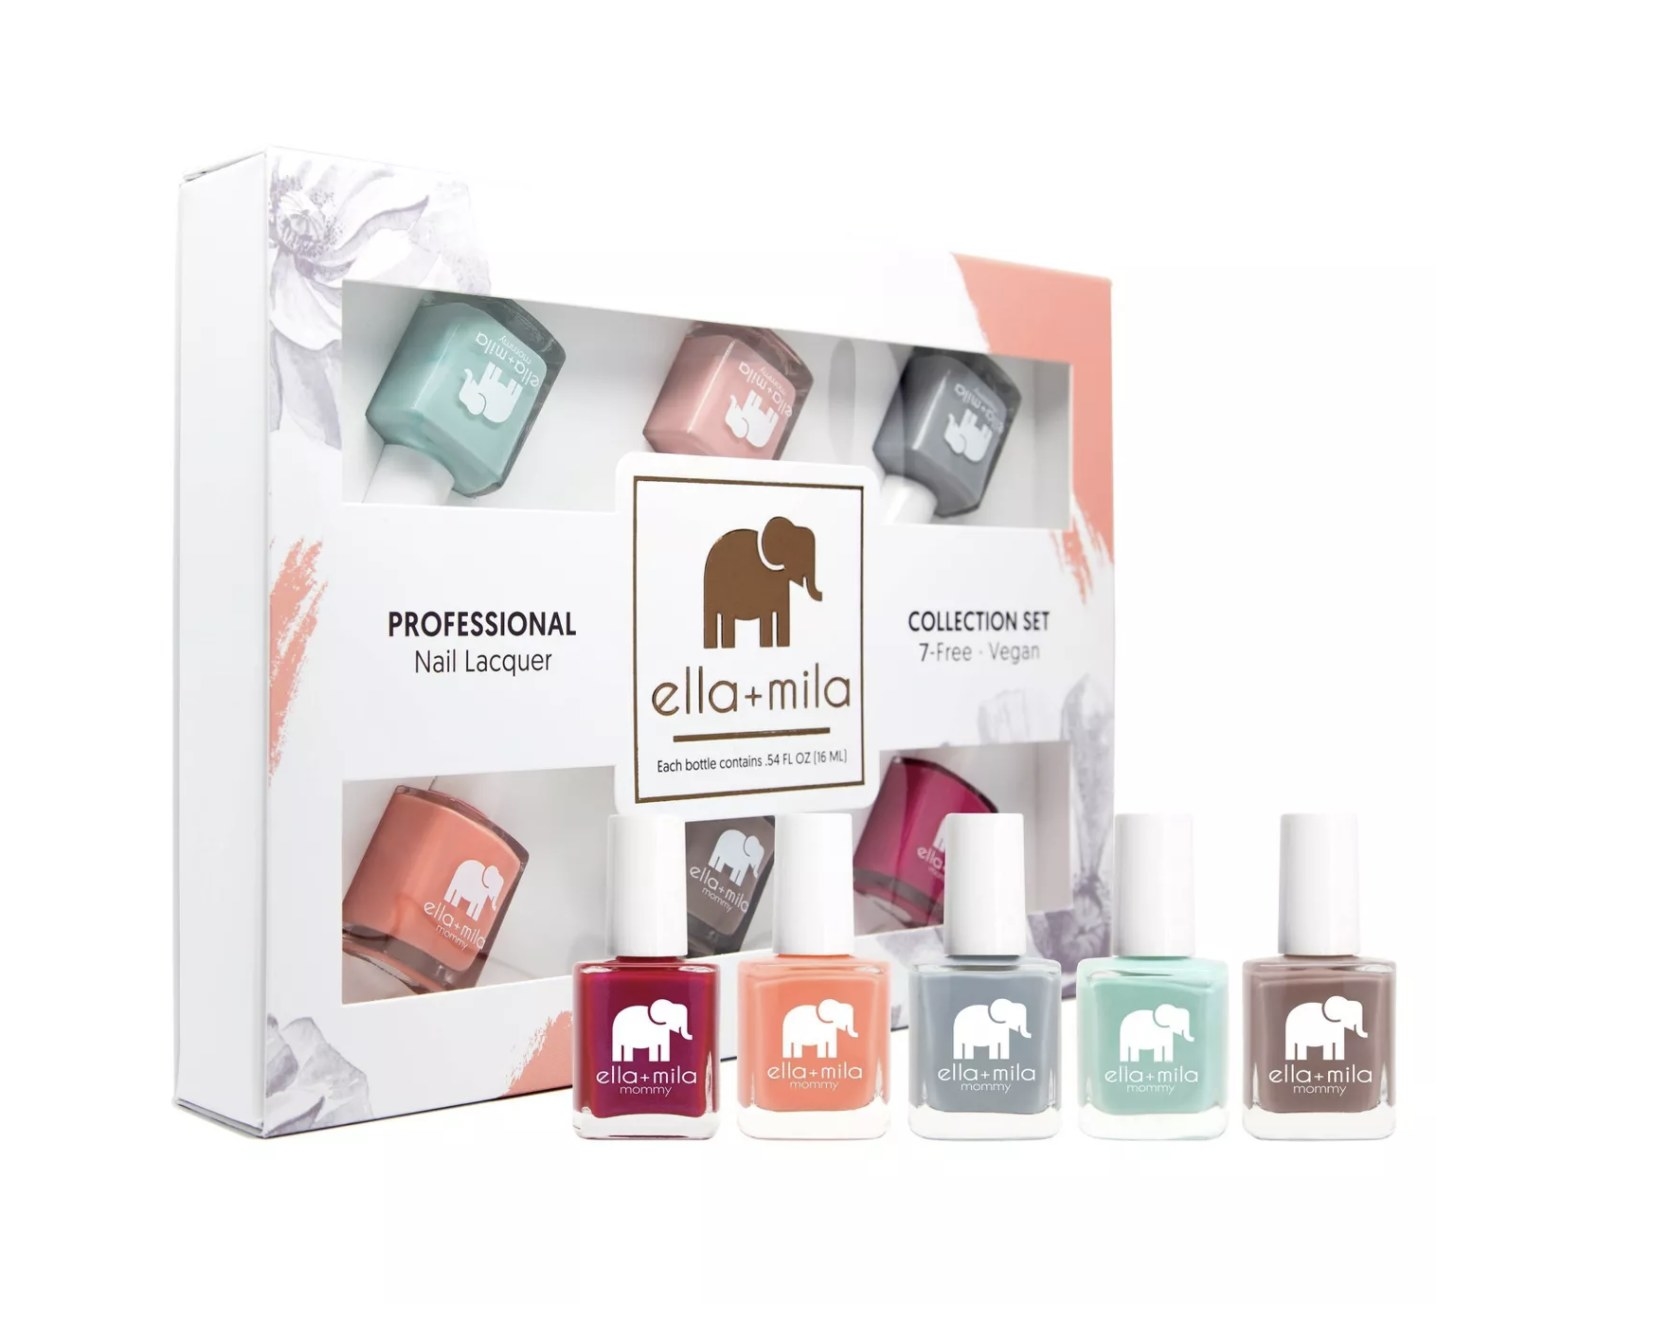 Nail polish packaging and six bottles of polish in red, orange, gray, aqua, and brown